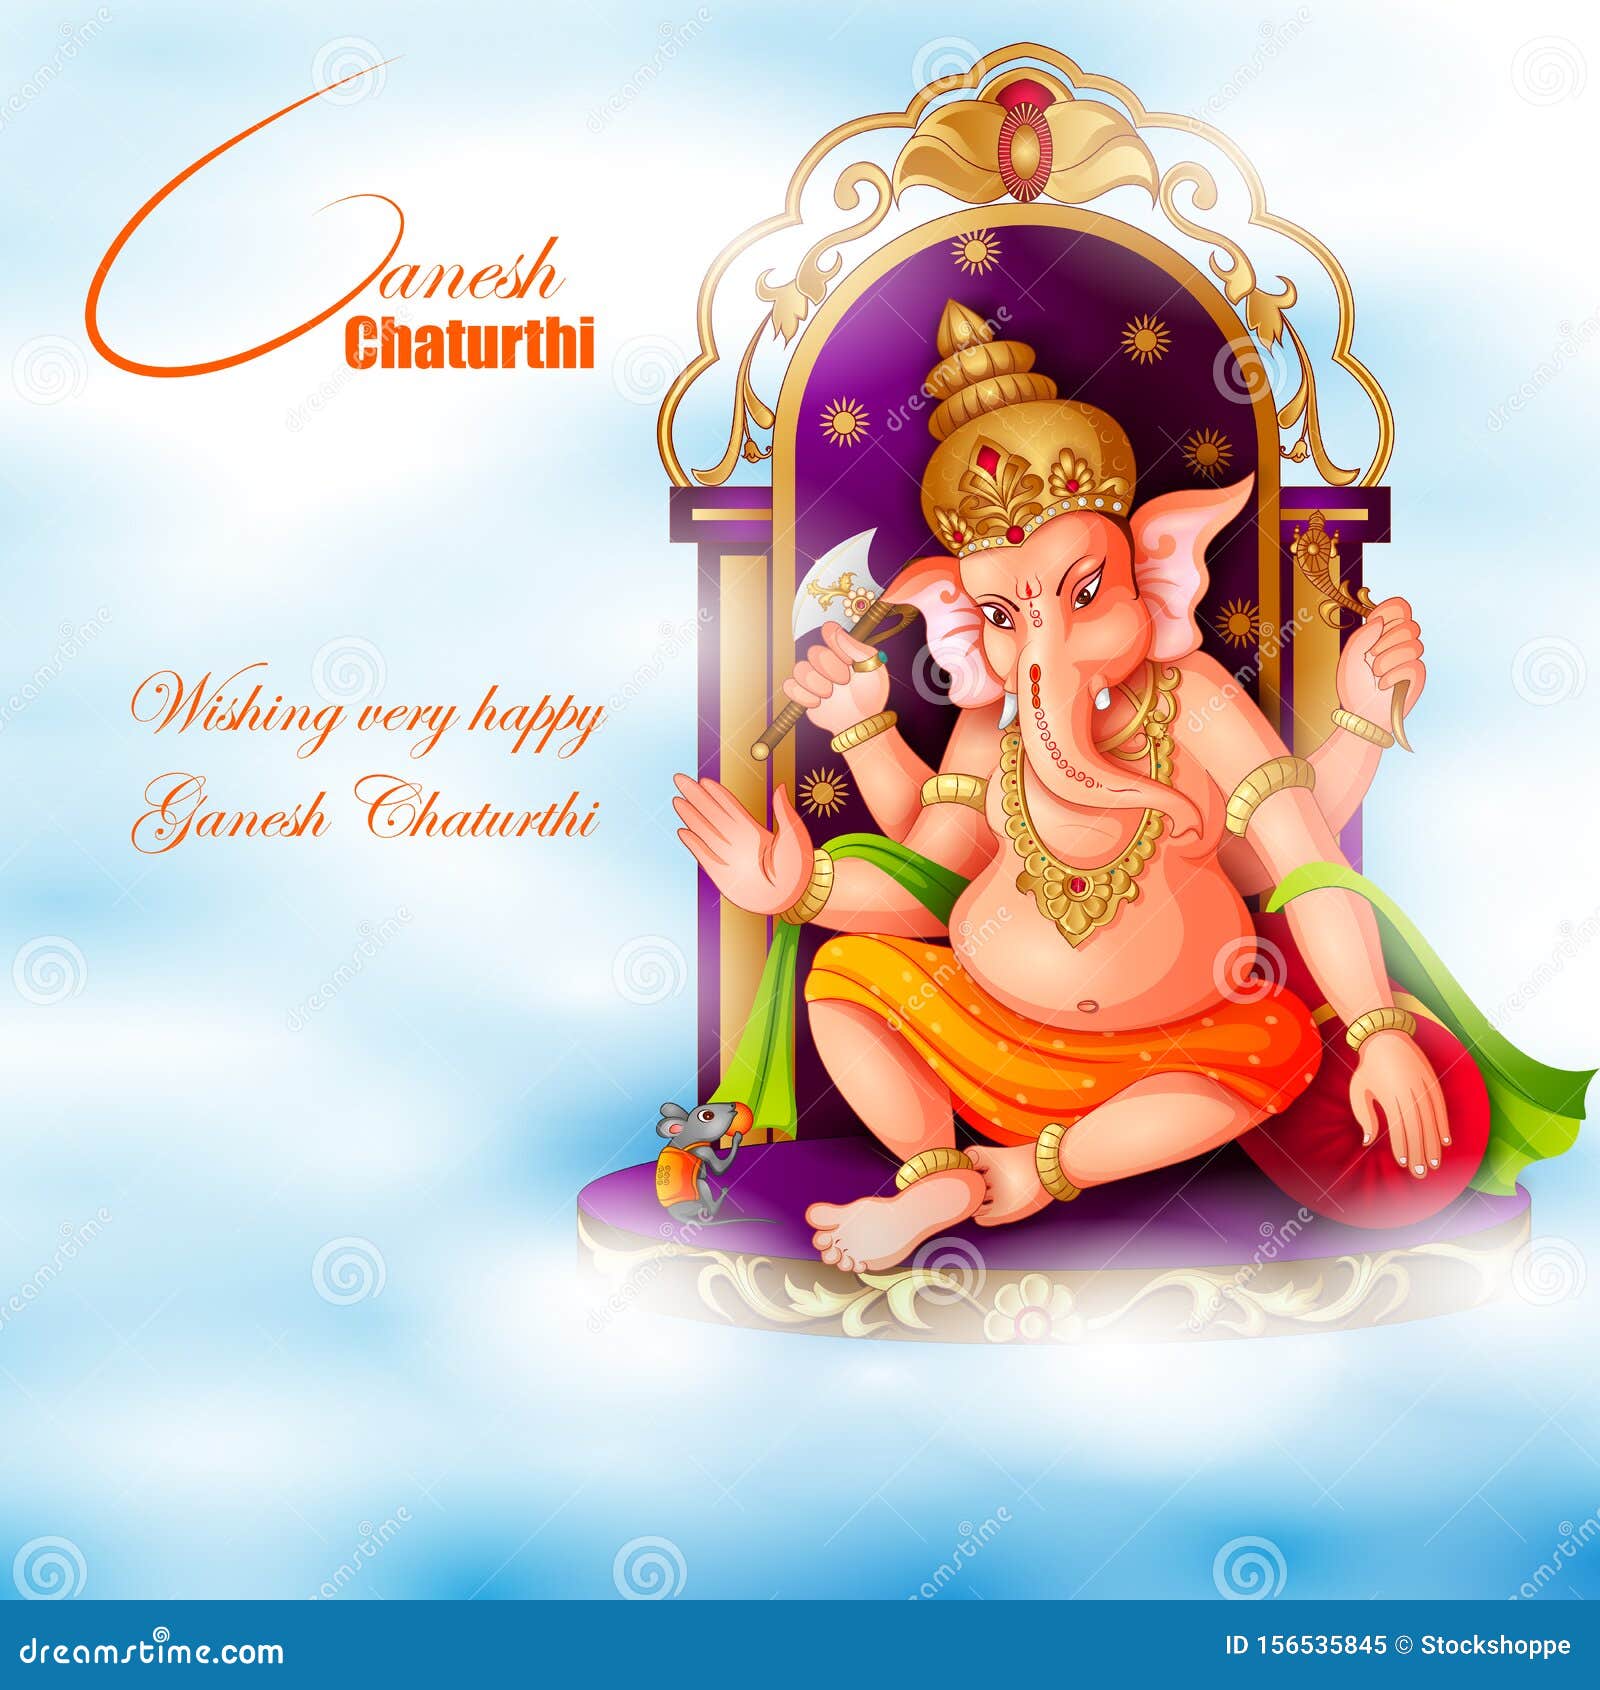 Lord Ganapati for Happy Ganesh Chaturthi Festival Religious Banner  Background Stock Vector - Illustration of luck, happy: 156535845